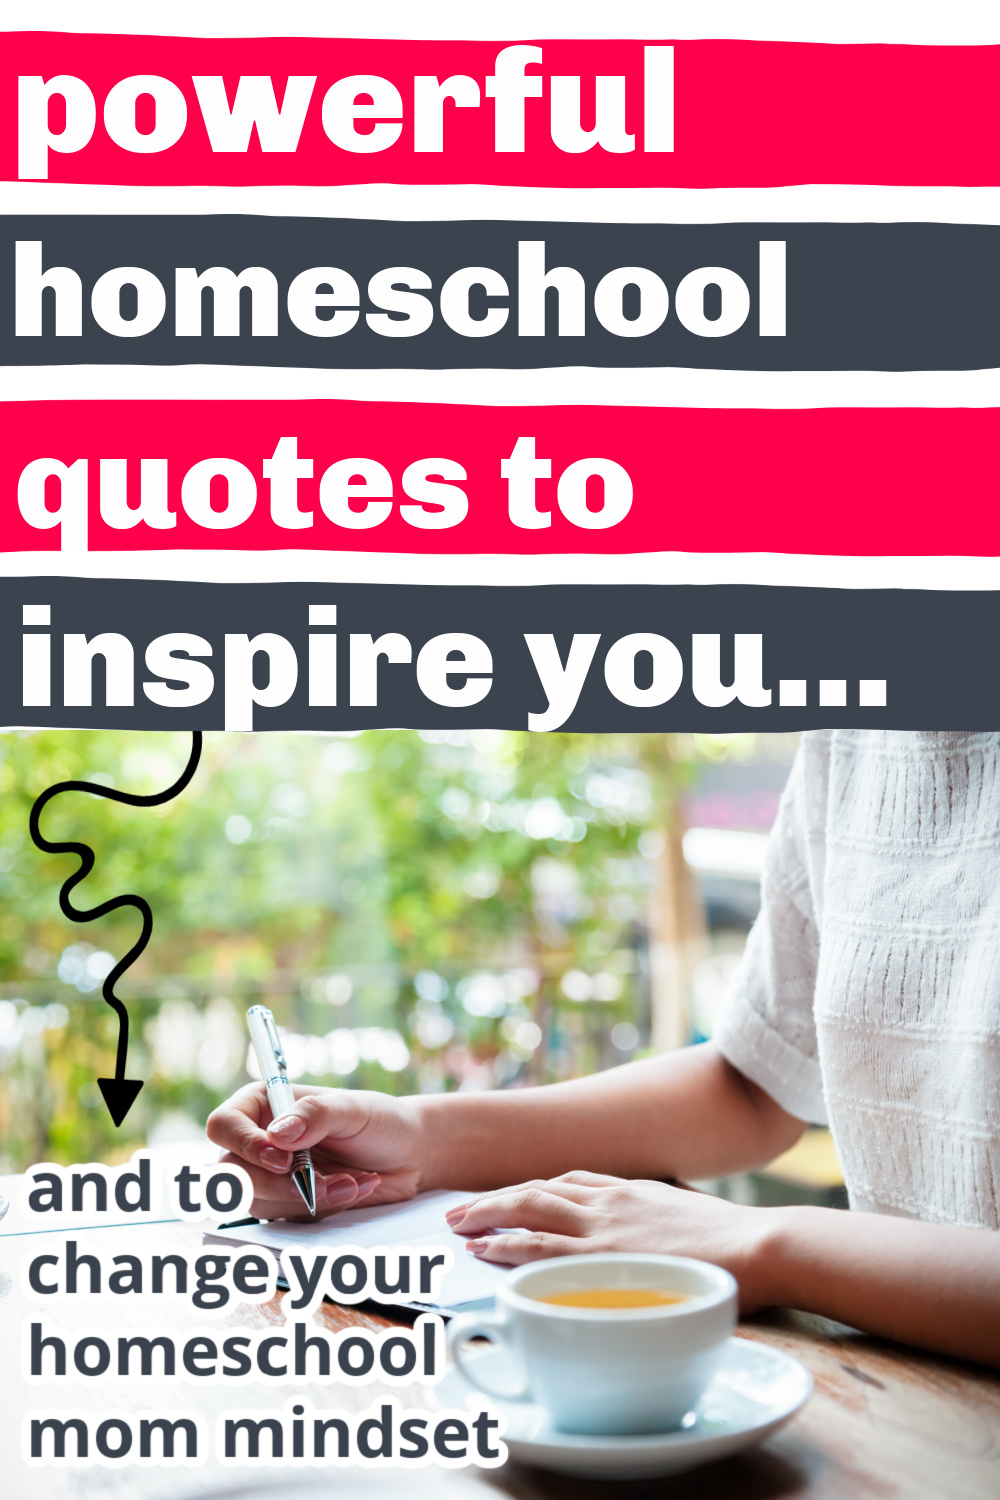 homeschool mom writing down inspiring homeschool quotes, cup of tea at her side, with text overlay, "powerful homeschool quotes to inspire you...and to change your homeschool mom mindset"